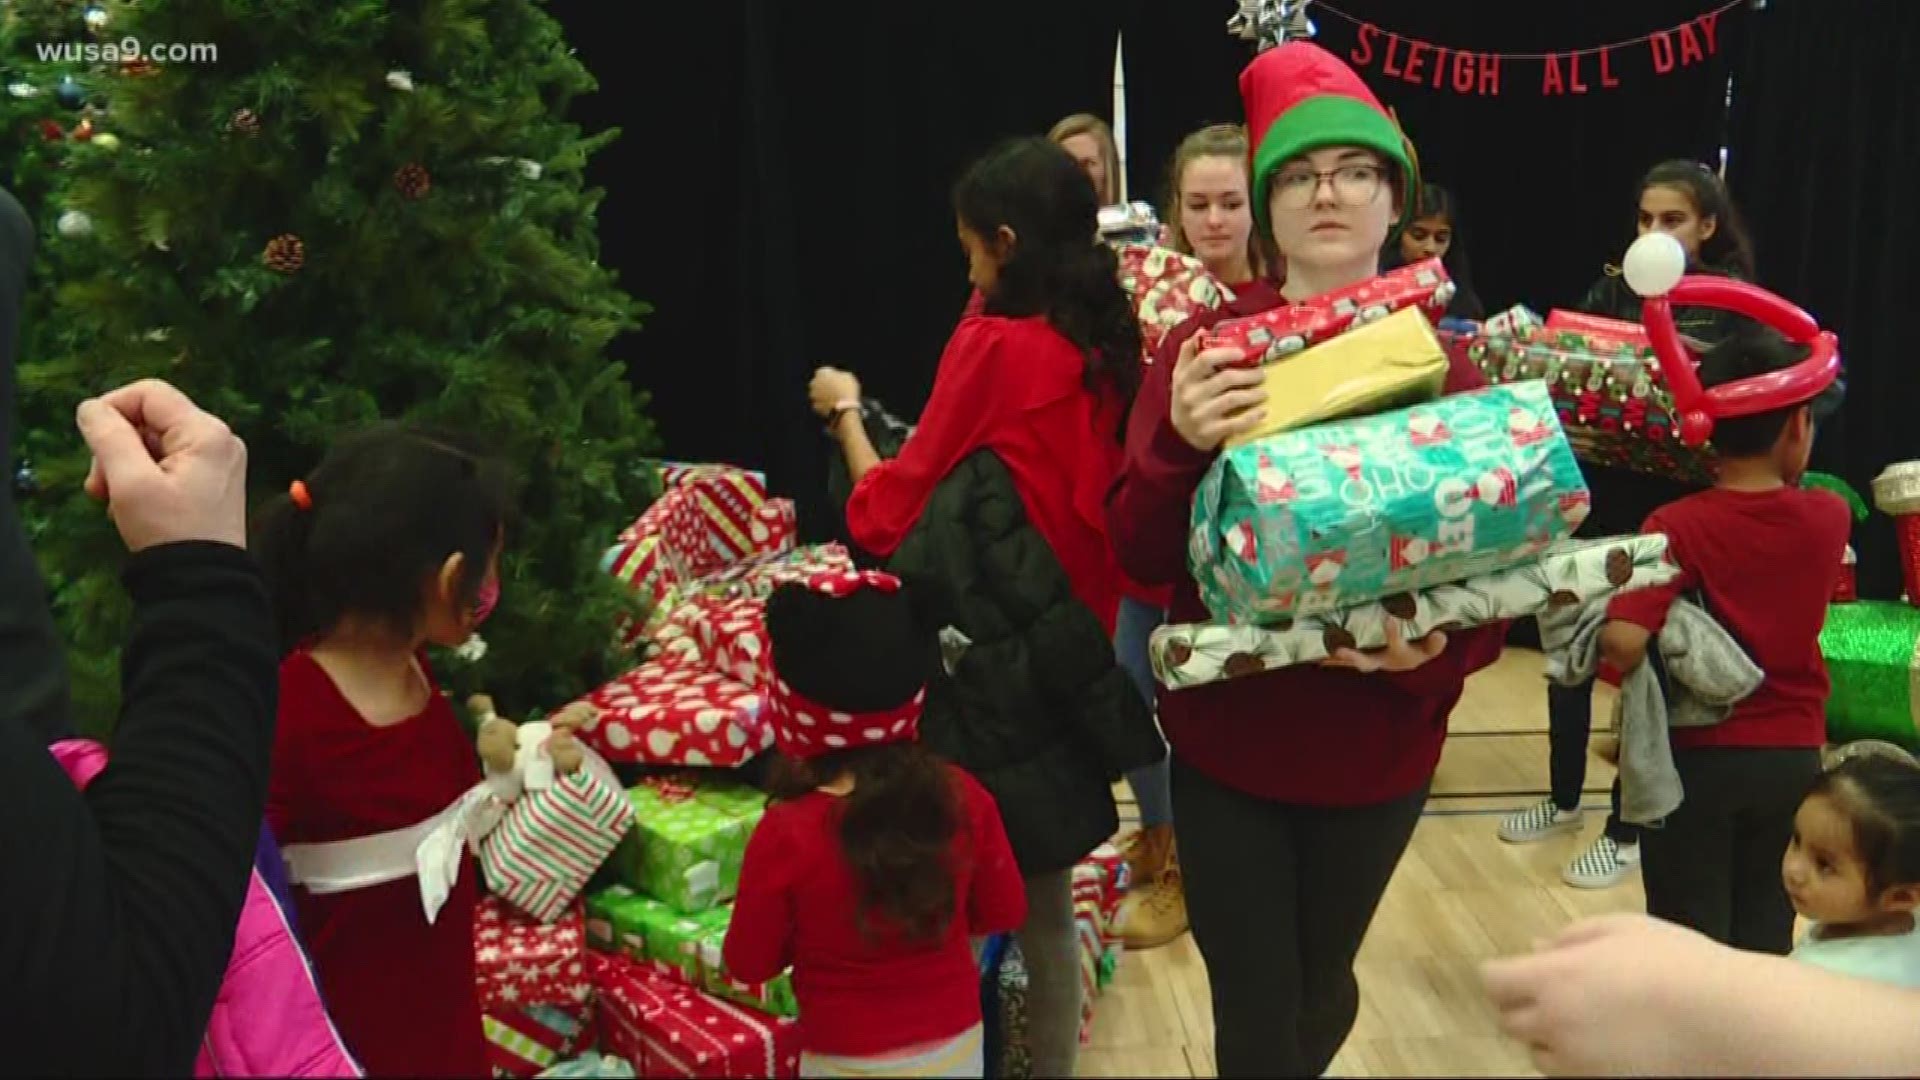 The Douglass Community Center in Leesburg was transformed into a winter wonderland Saturday - filled with stacks of gifts for each of the more than five hundred families who turned out.